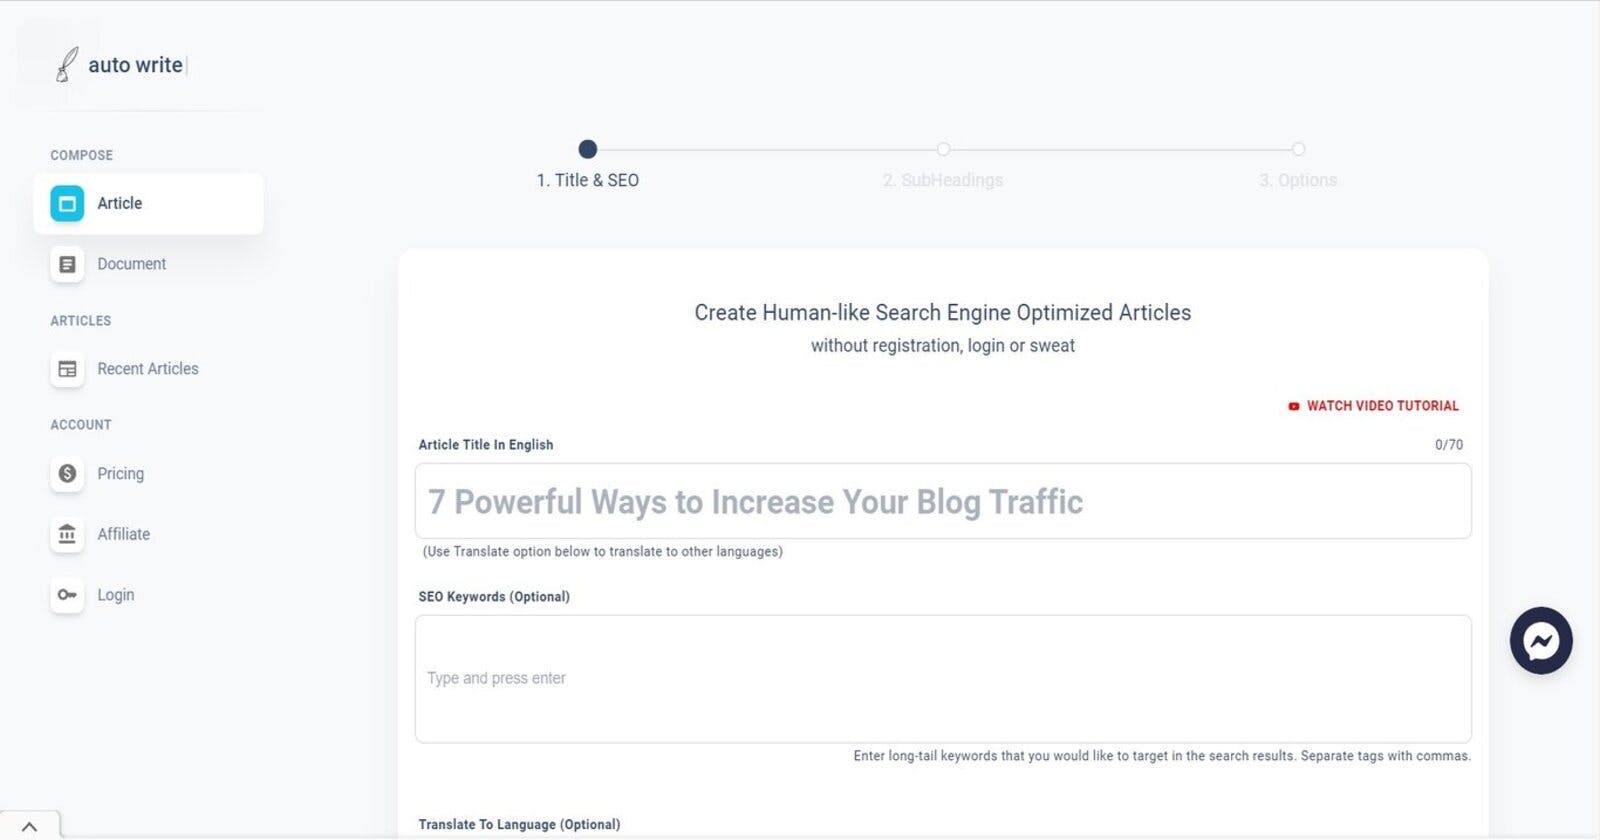 AutoWrite - The Best AI SEO Writer for Human-Like Optimized Articles